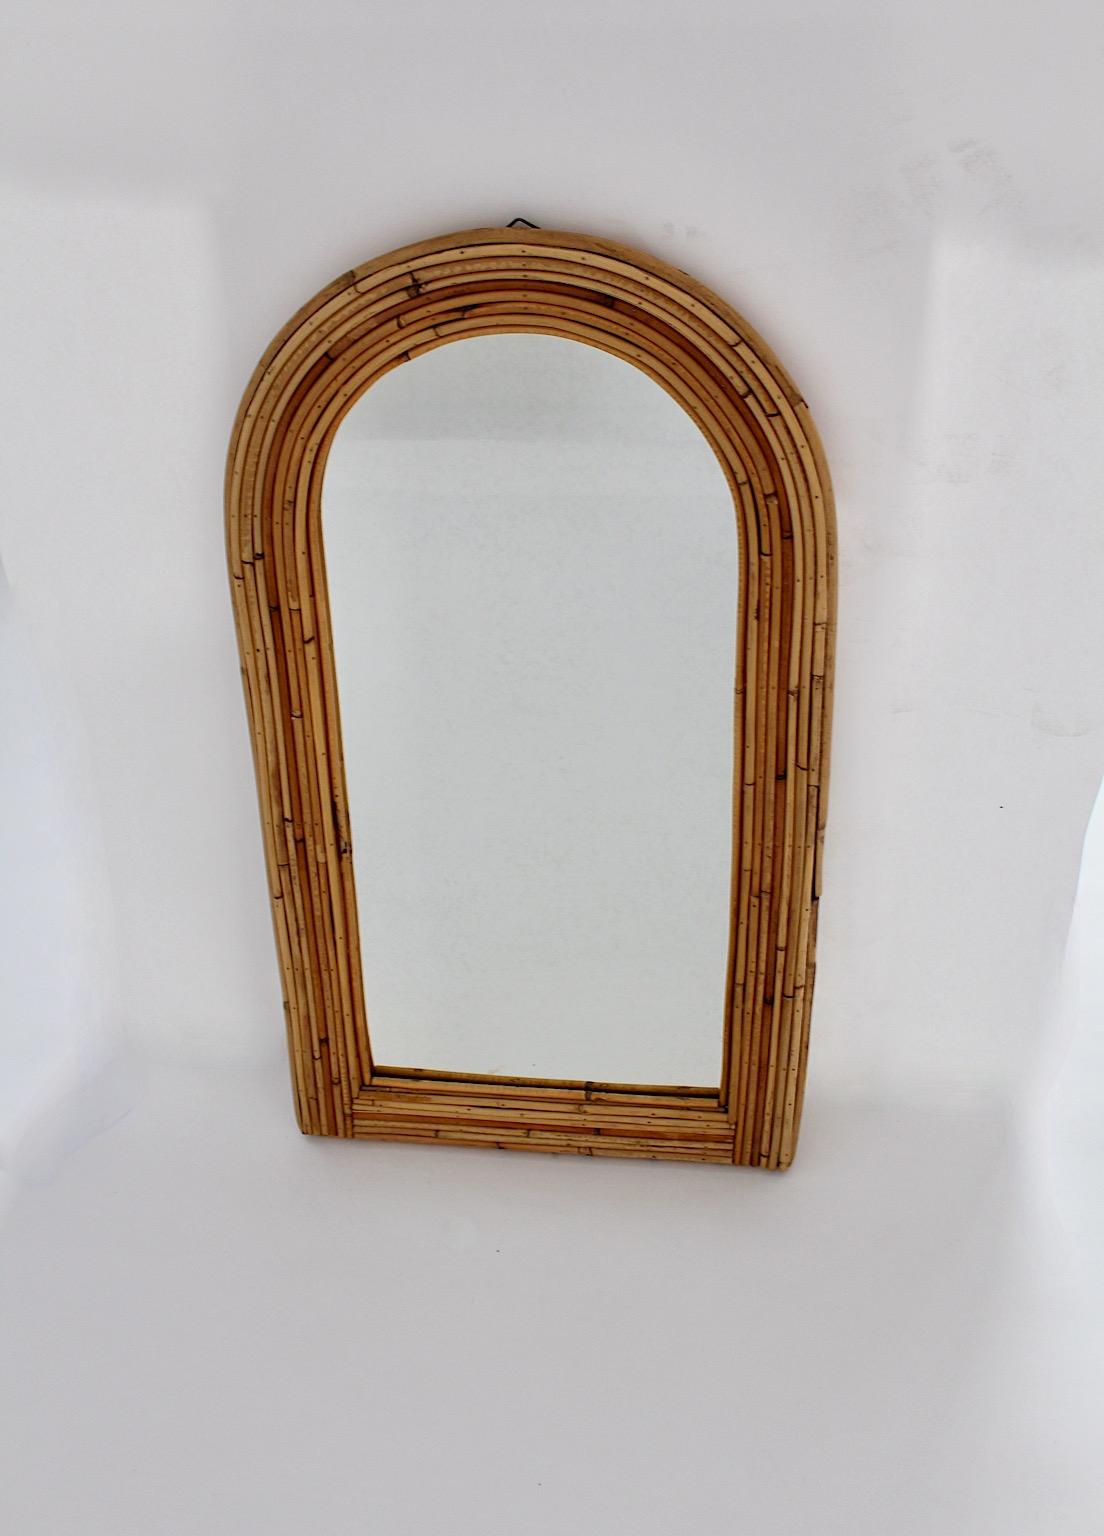 Bamboo Rattan Mid Century Modern Vintage Wall Mirror 1970s France In Good Condition For Sale In Vienna, AT